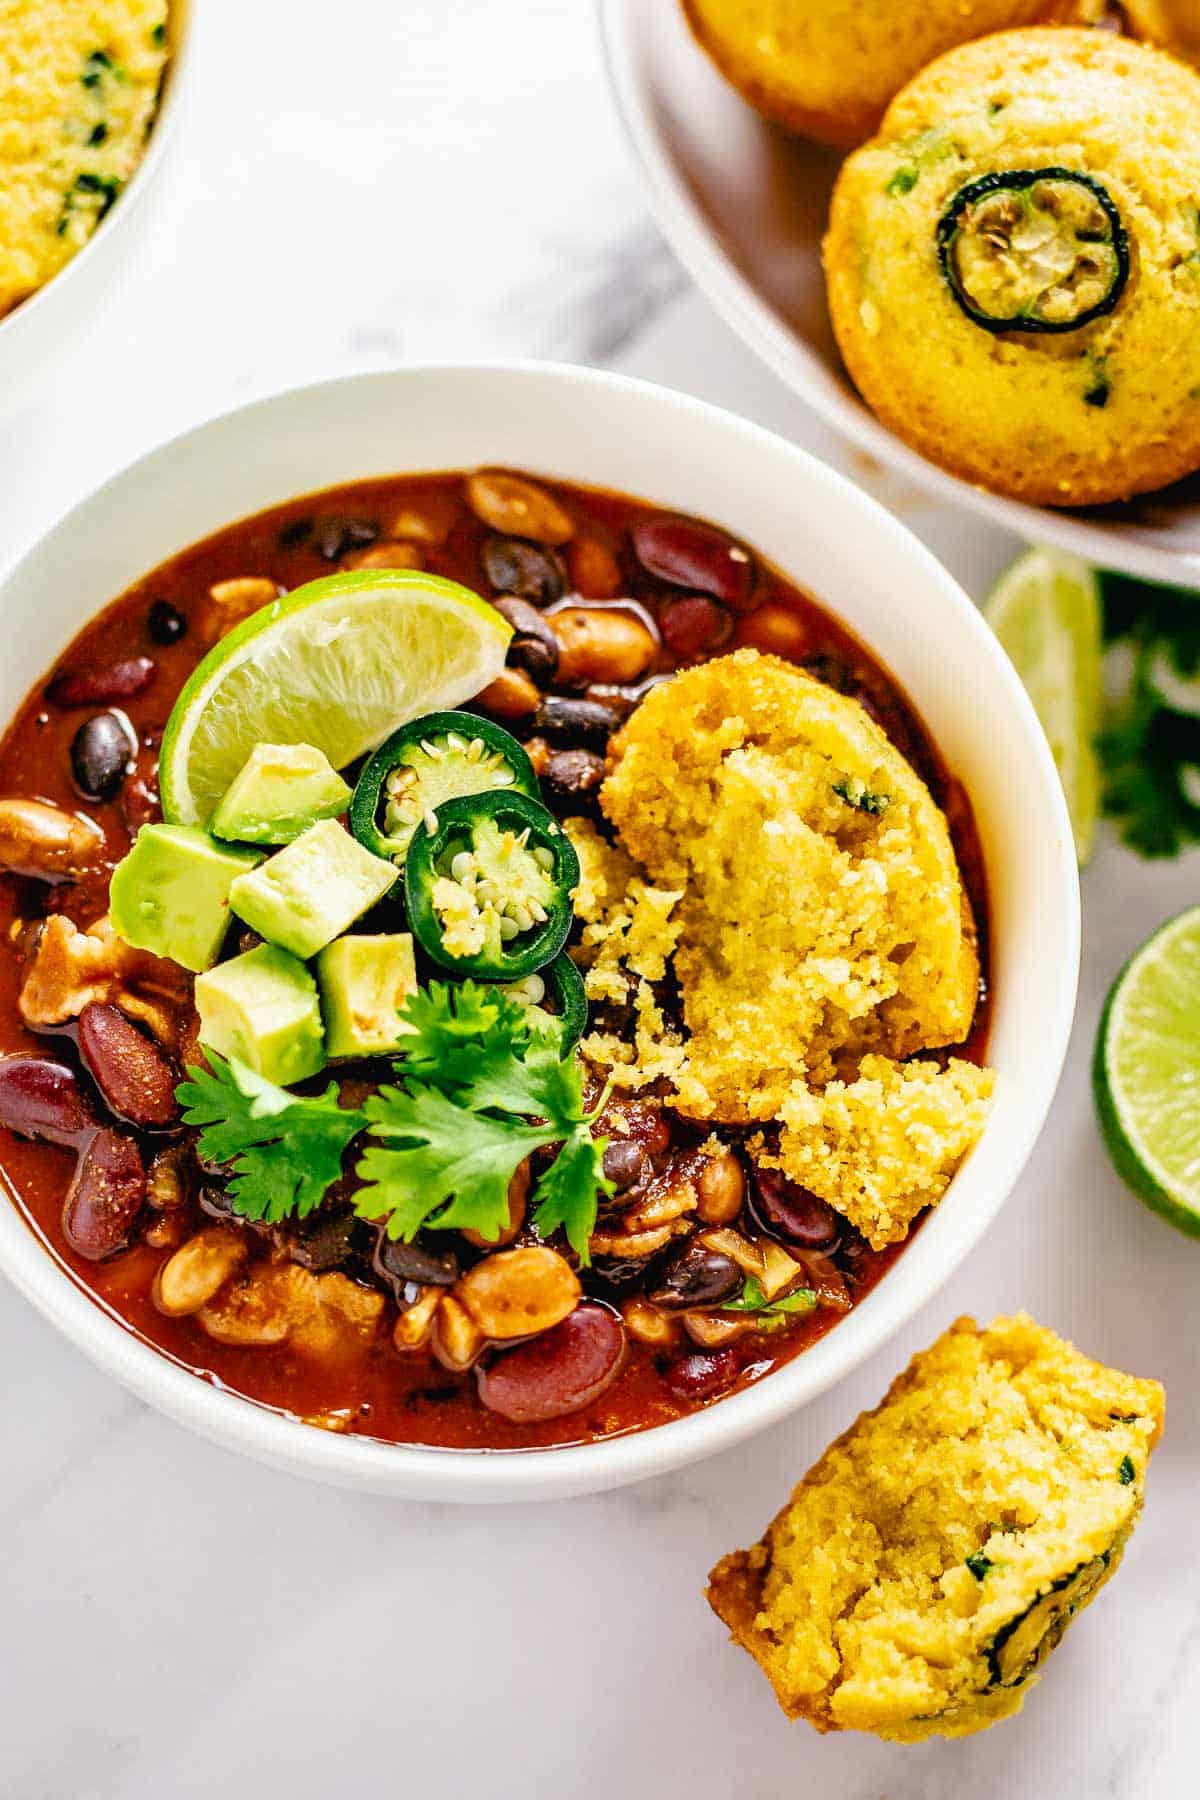 cooked beans in red sauce in a bowl with cornbread muffins and jaalpeno, cornbread, lime toppings